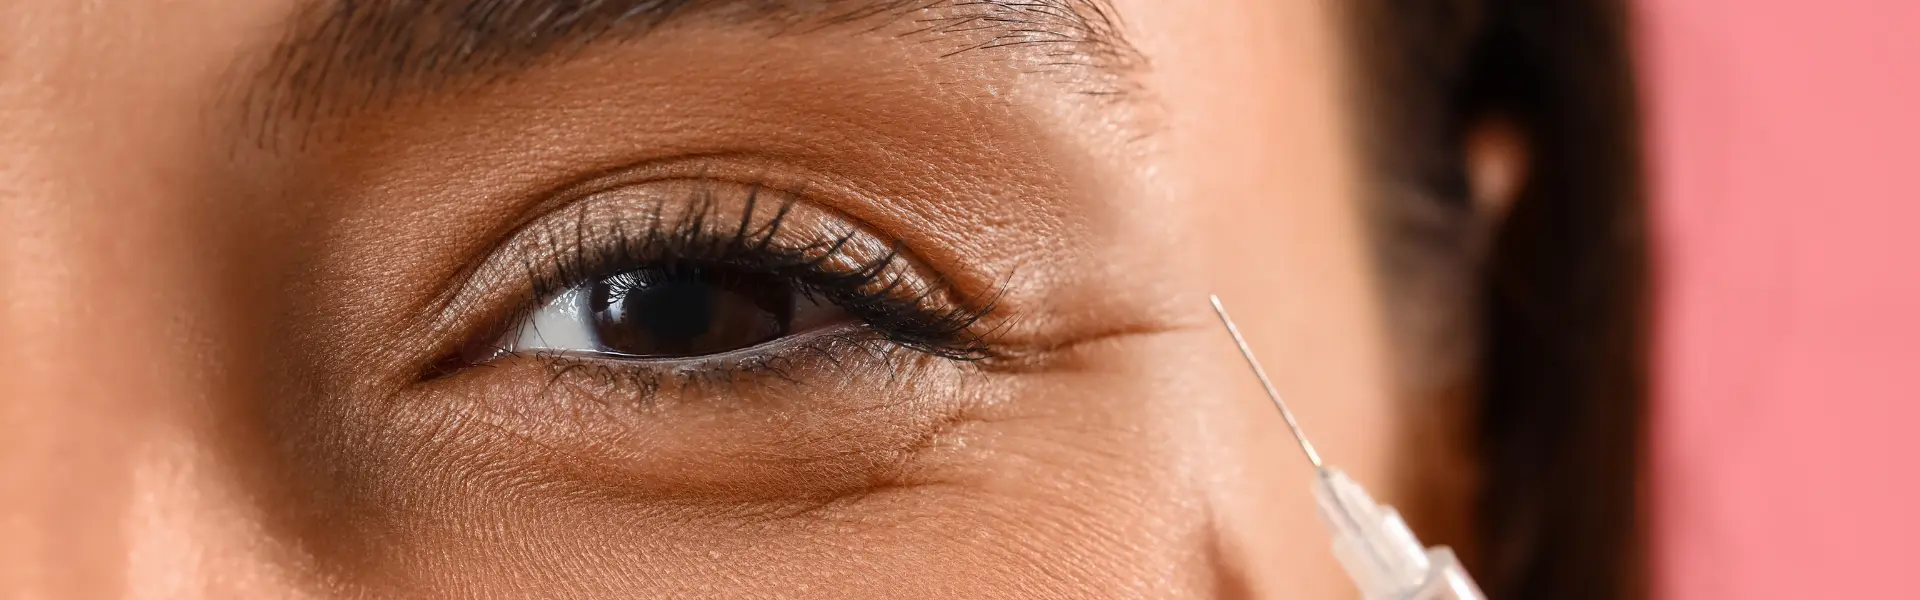 A woman's eye is being injected with a needle.